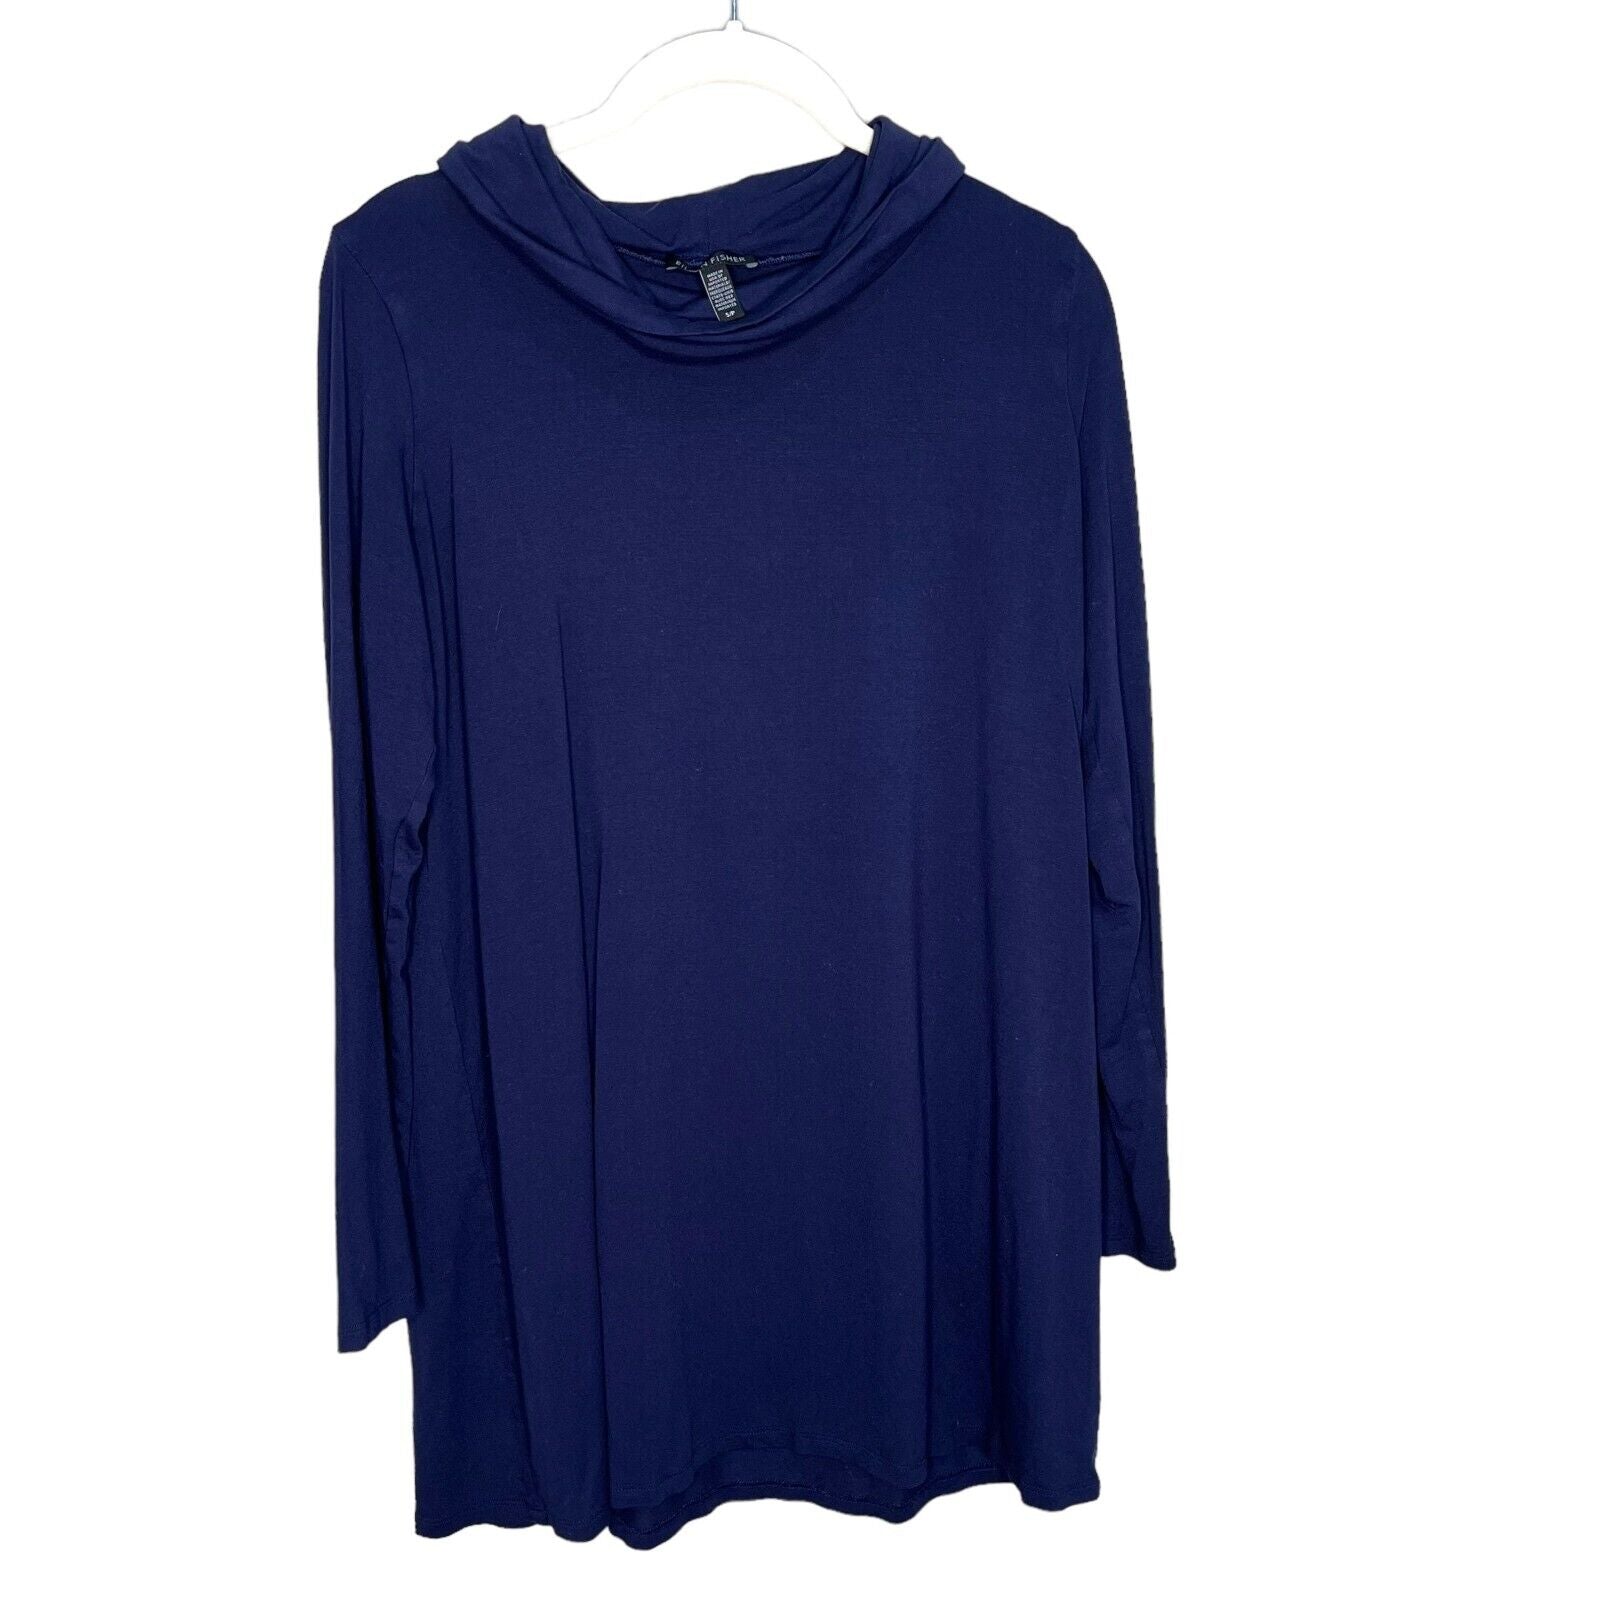 Eileen Fisher Blue Jersey Turtleneck Tunic Top Small